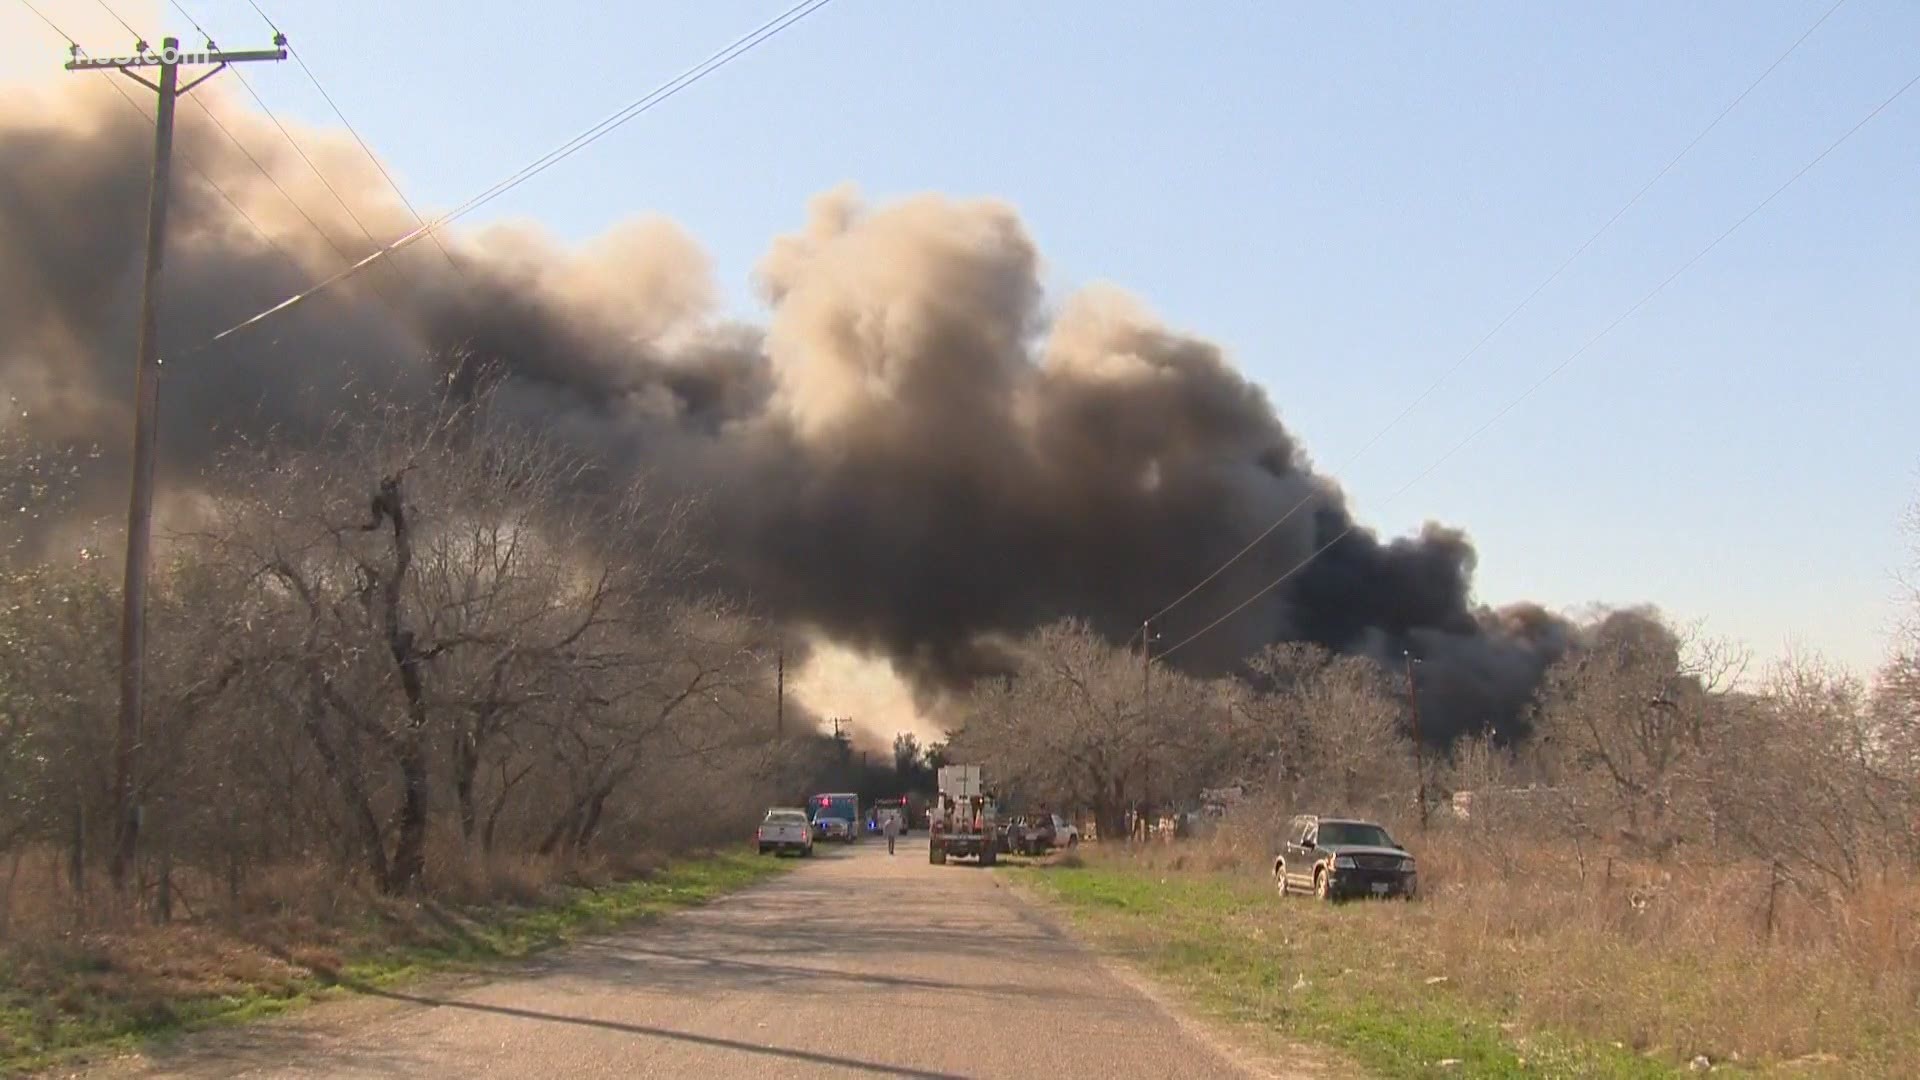 Local authorities believe a tire fire might have started the blaze, and caused those flames to spread.